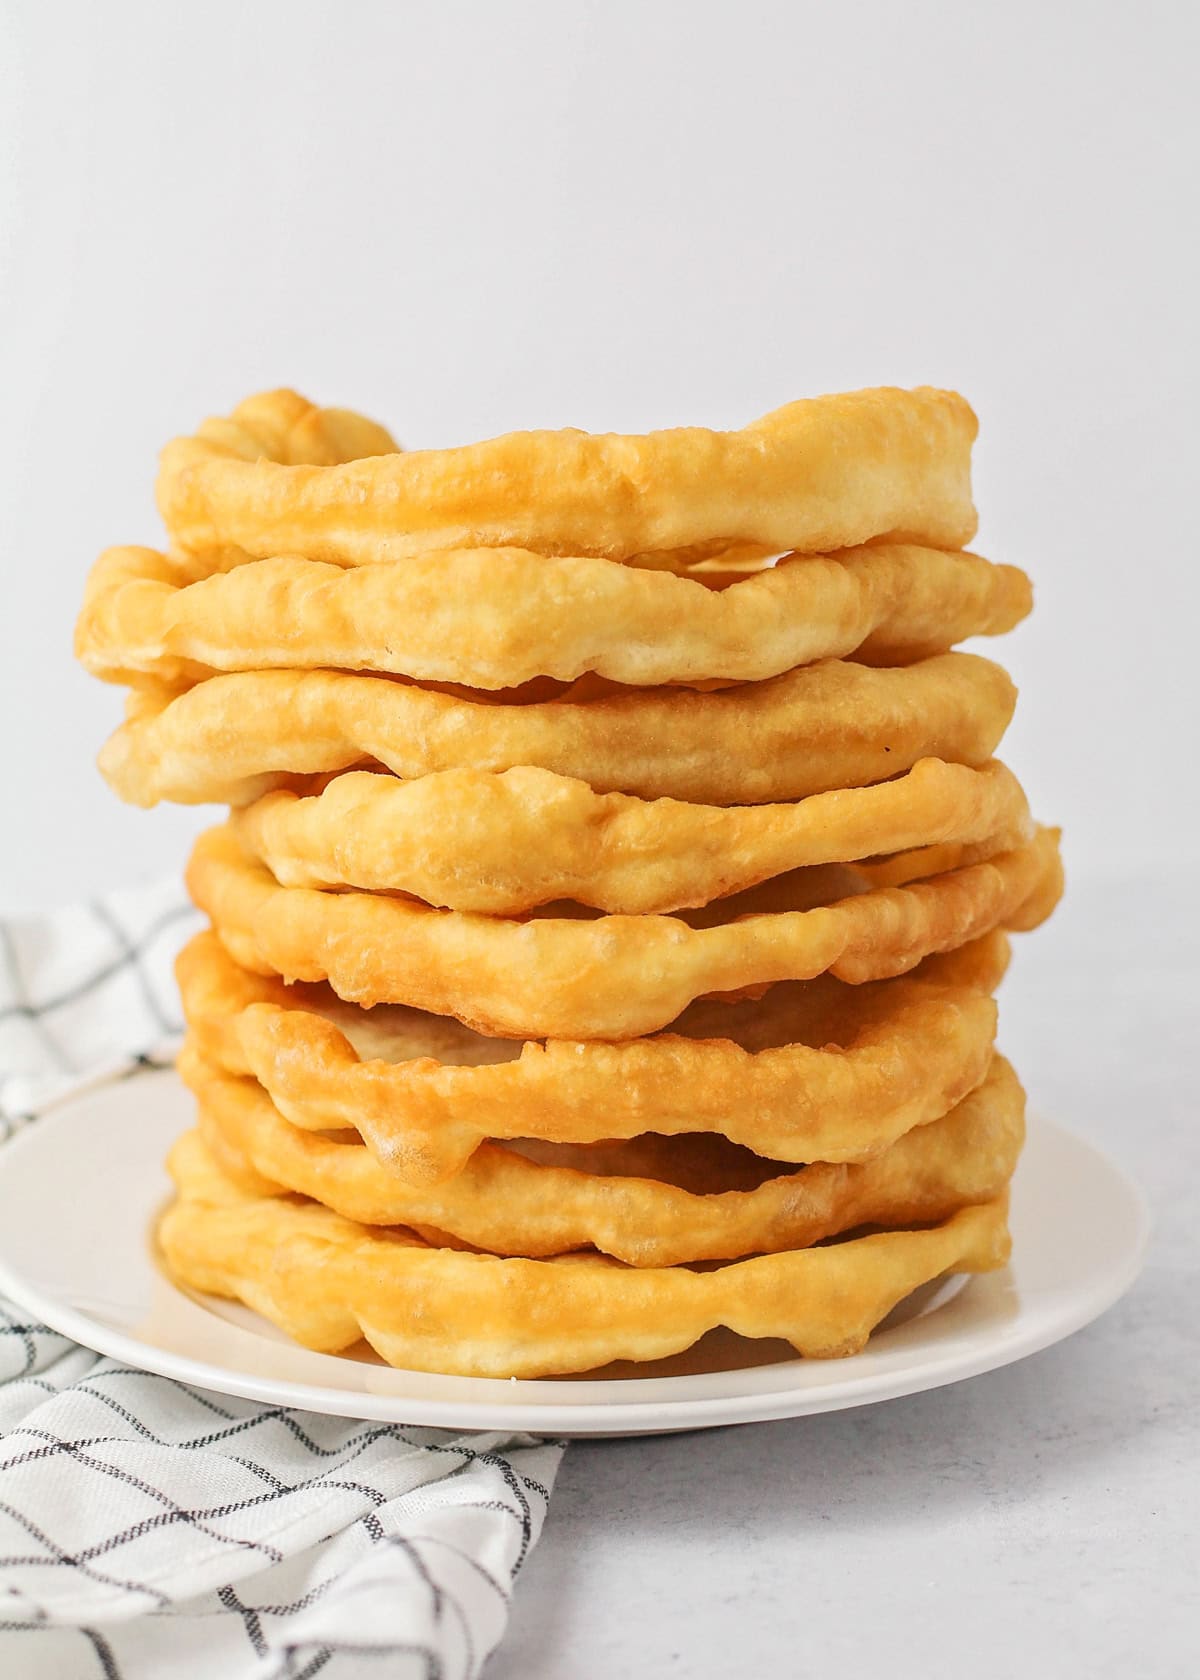 Homemade fry bread stacked on top of each other on white plate.